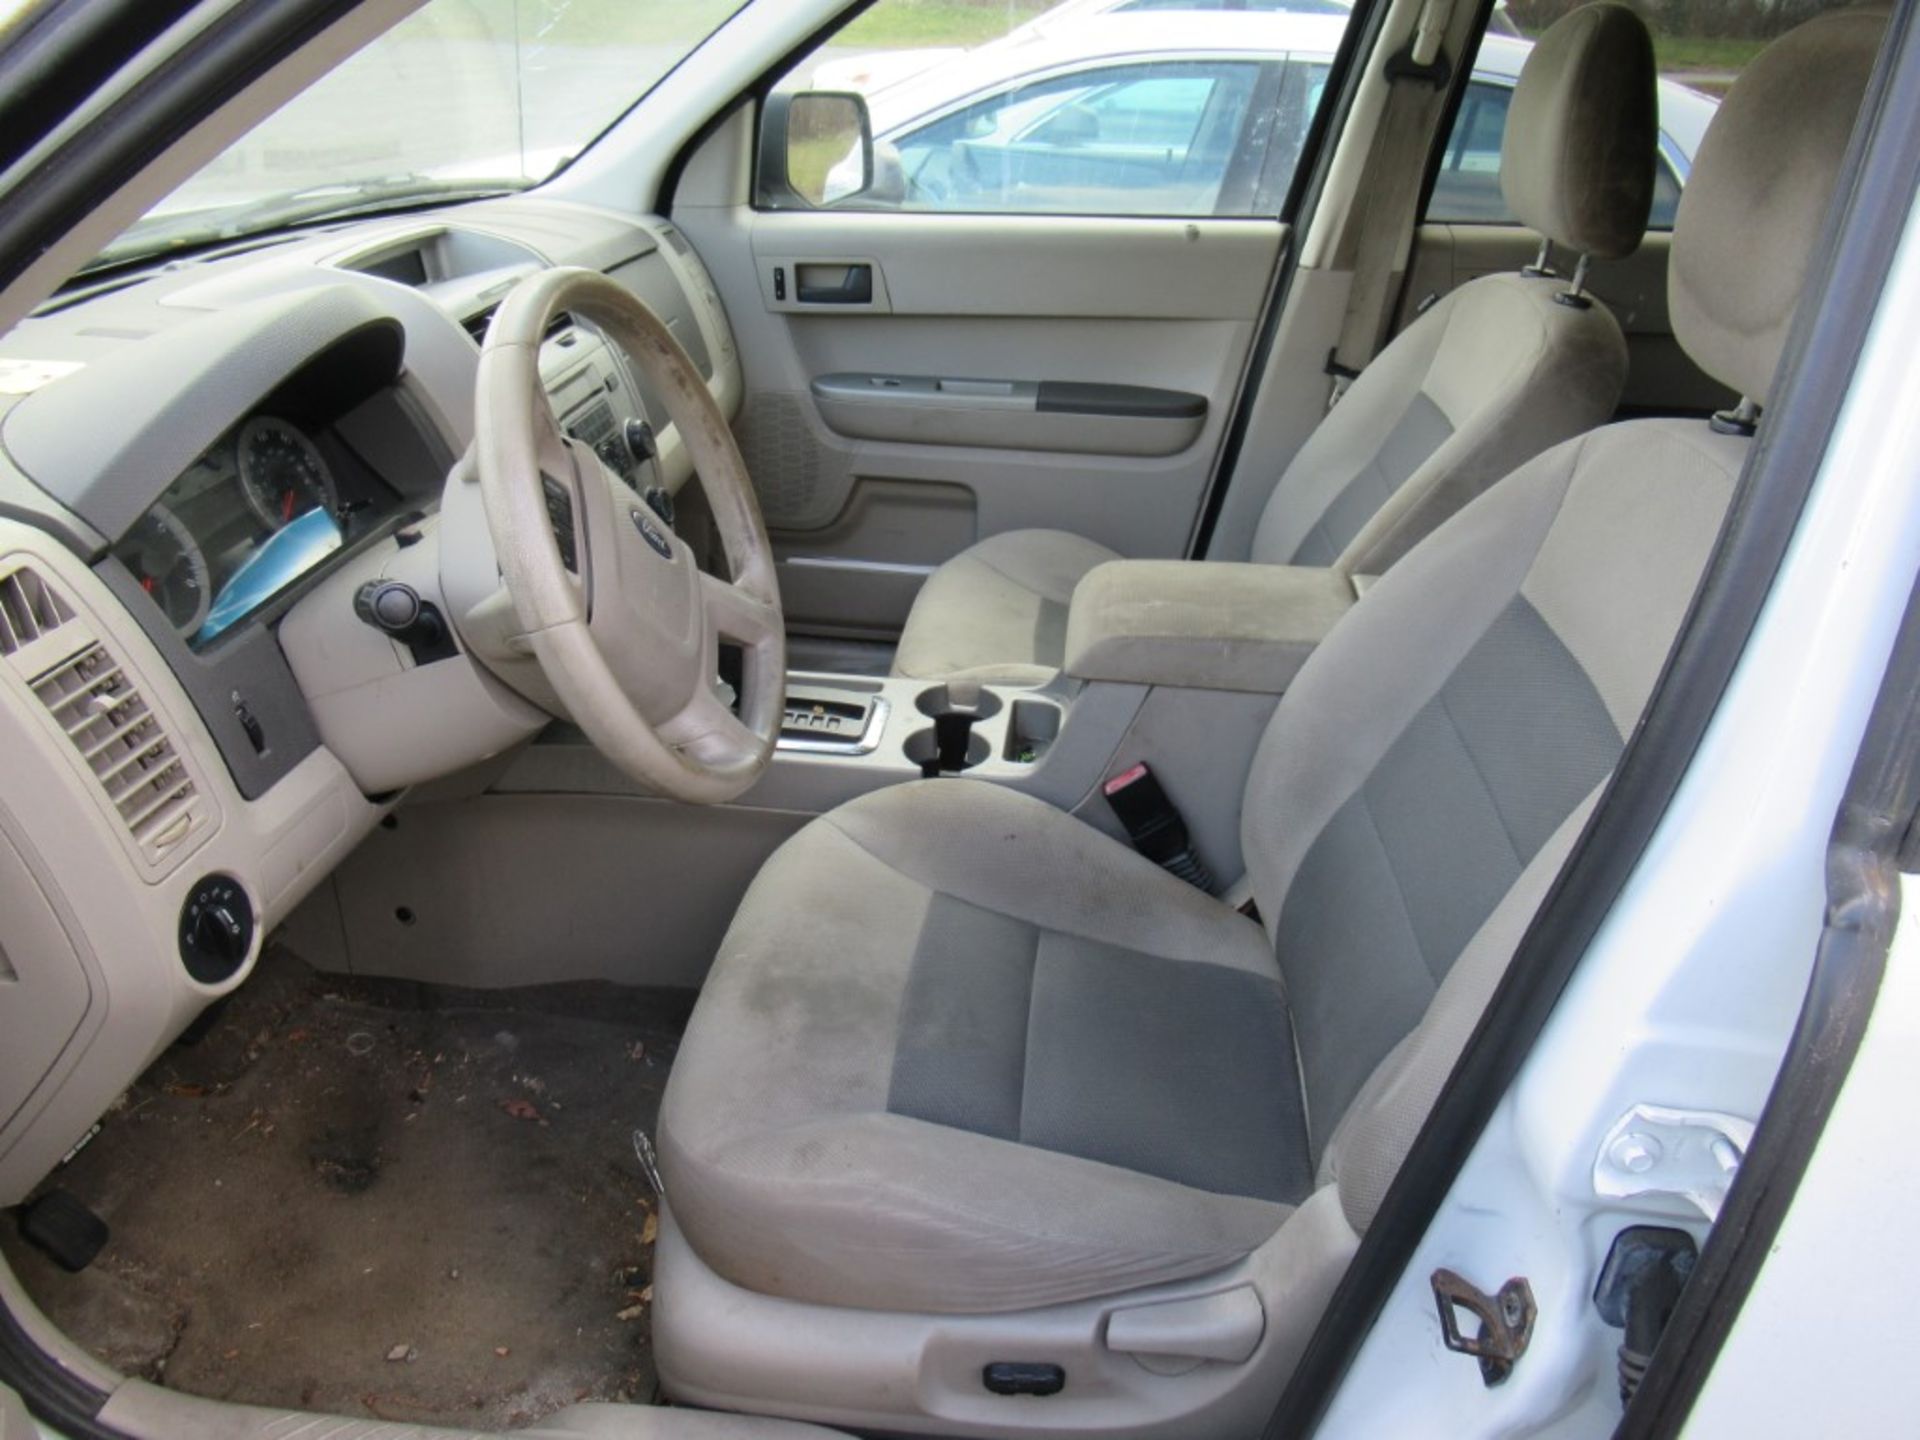 2008 Ford Escape XLT SUV , VIN 1FMCU02118KD90320, Automatic, Cruise Control, AC, PW, PL, PS, AM/FM/ - Image 25 of 31